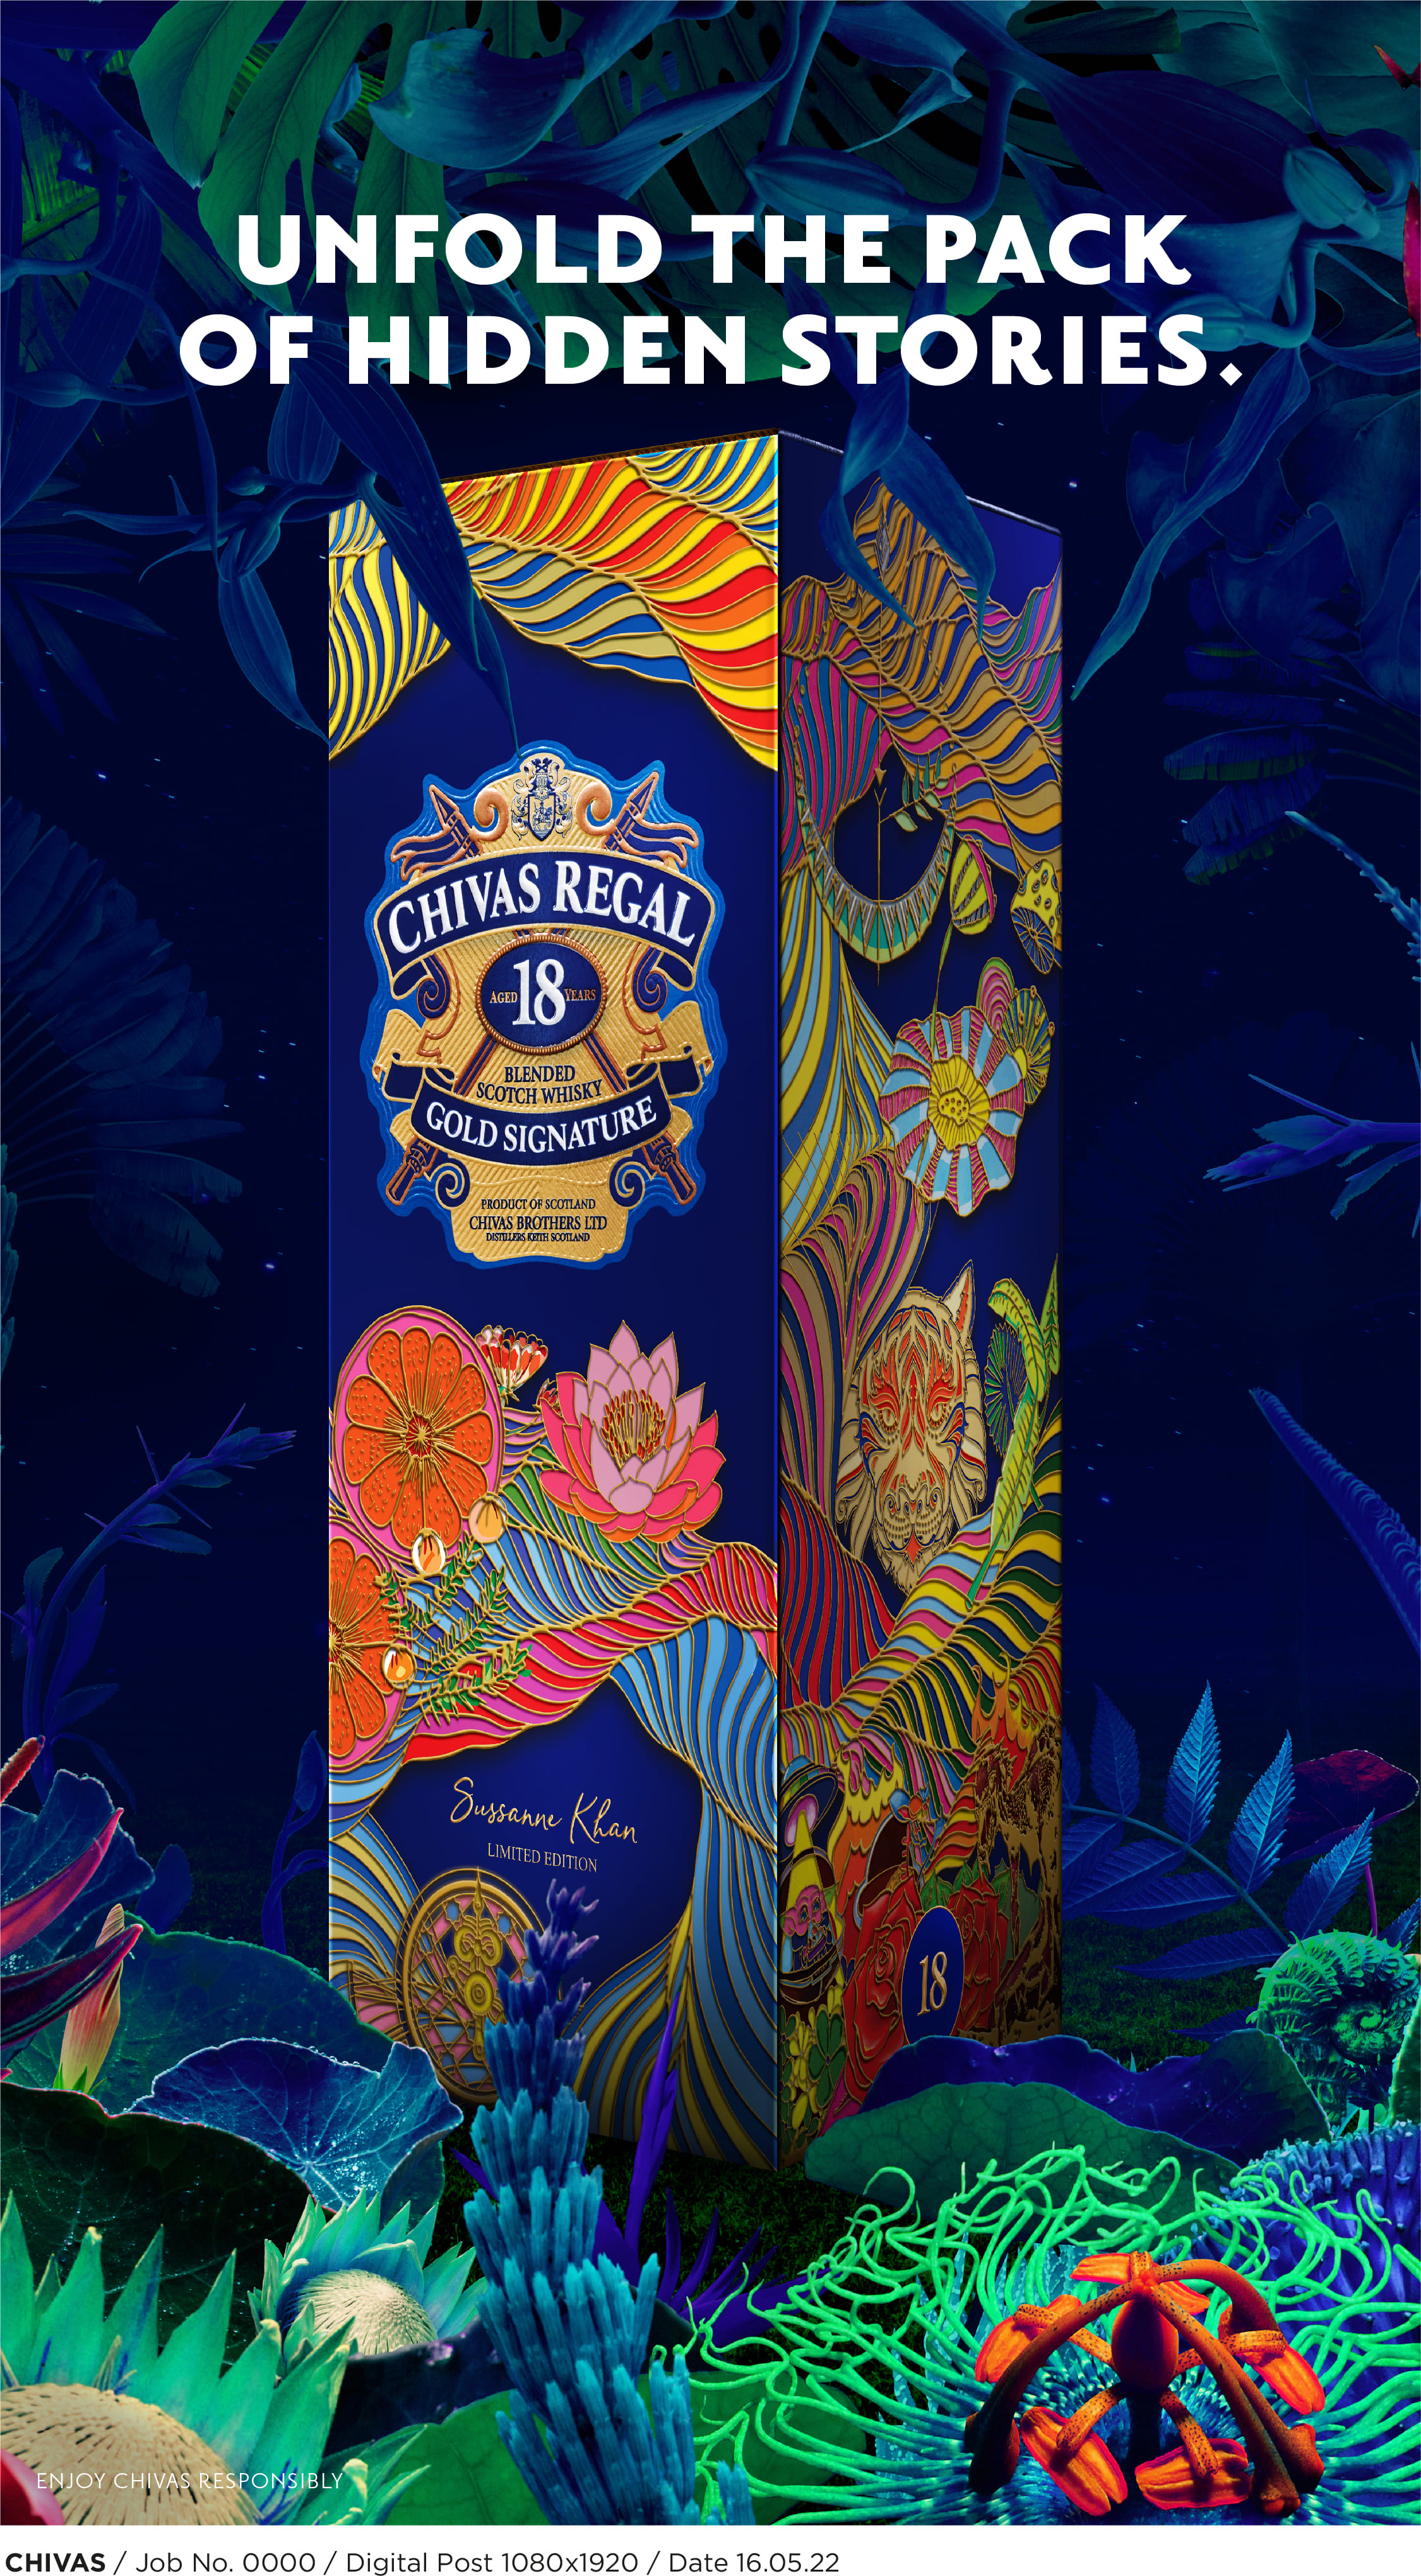 Chivas 18 Launches a Limited-Edition Pack designed by celebrated designer Sussanne Khan